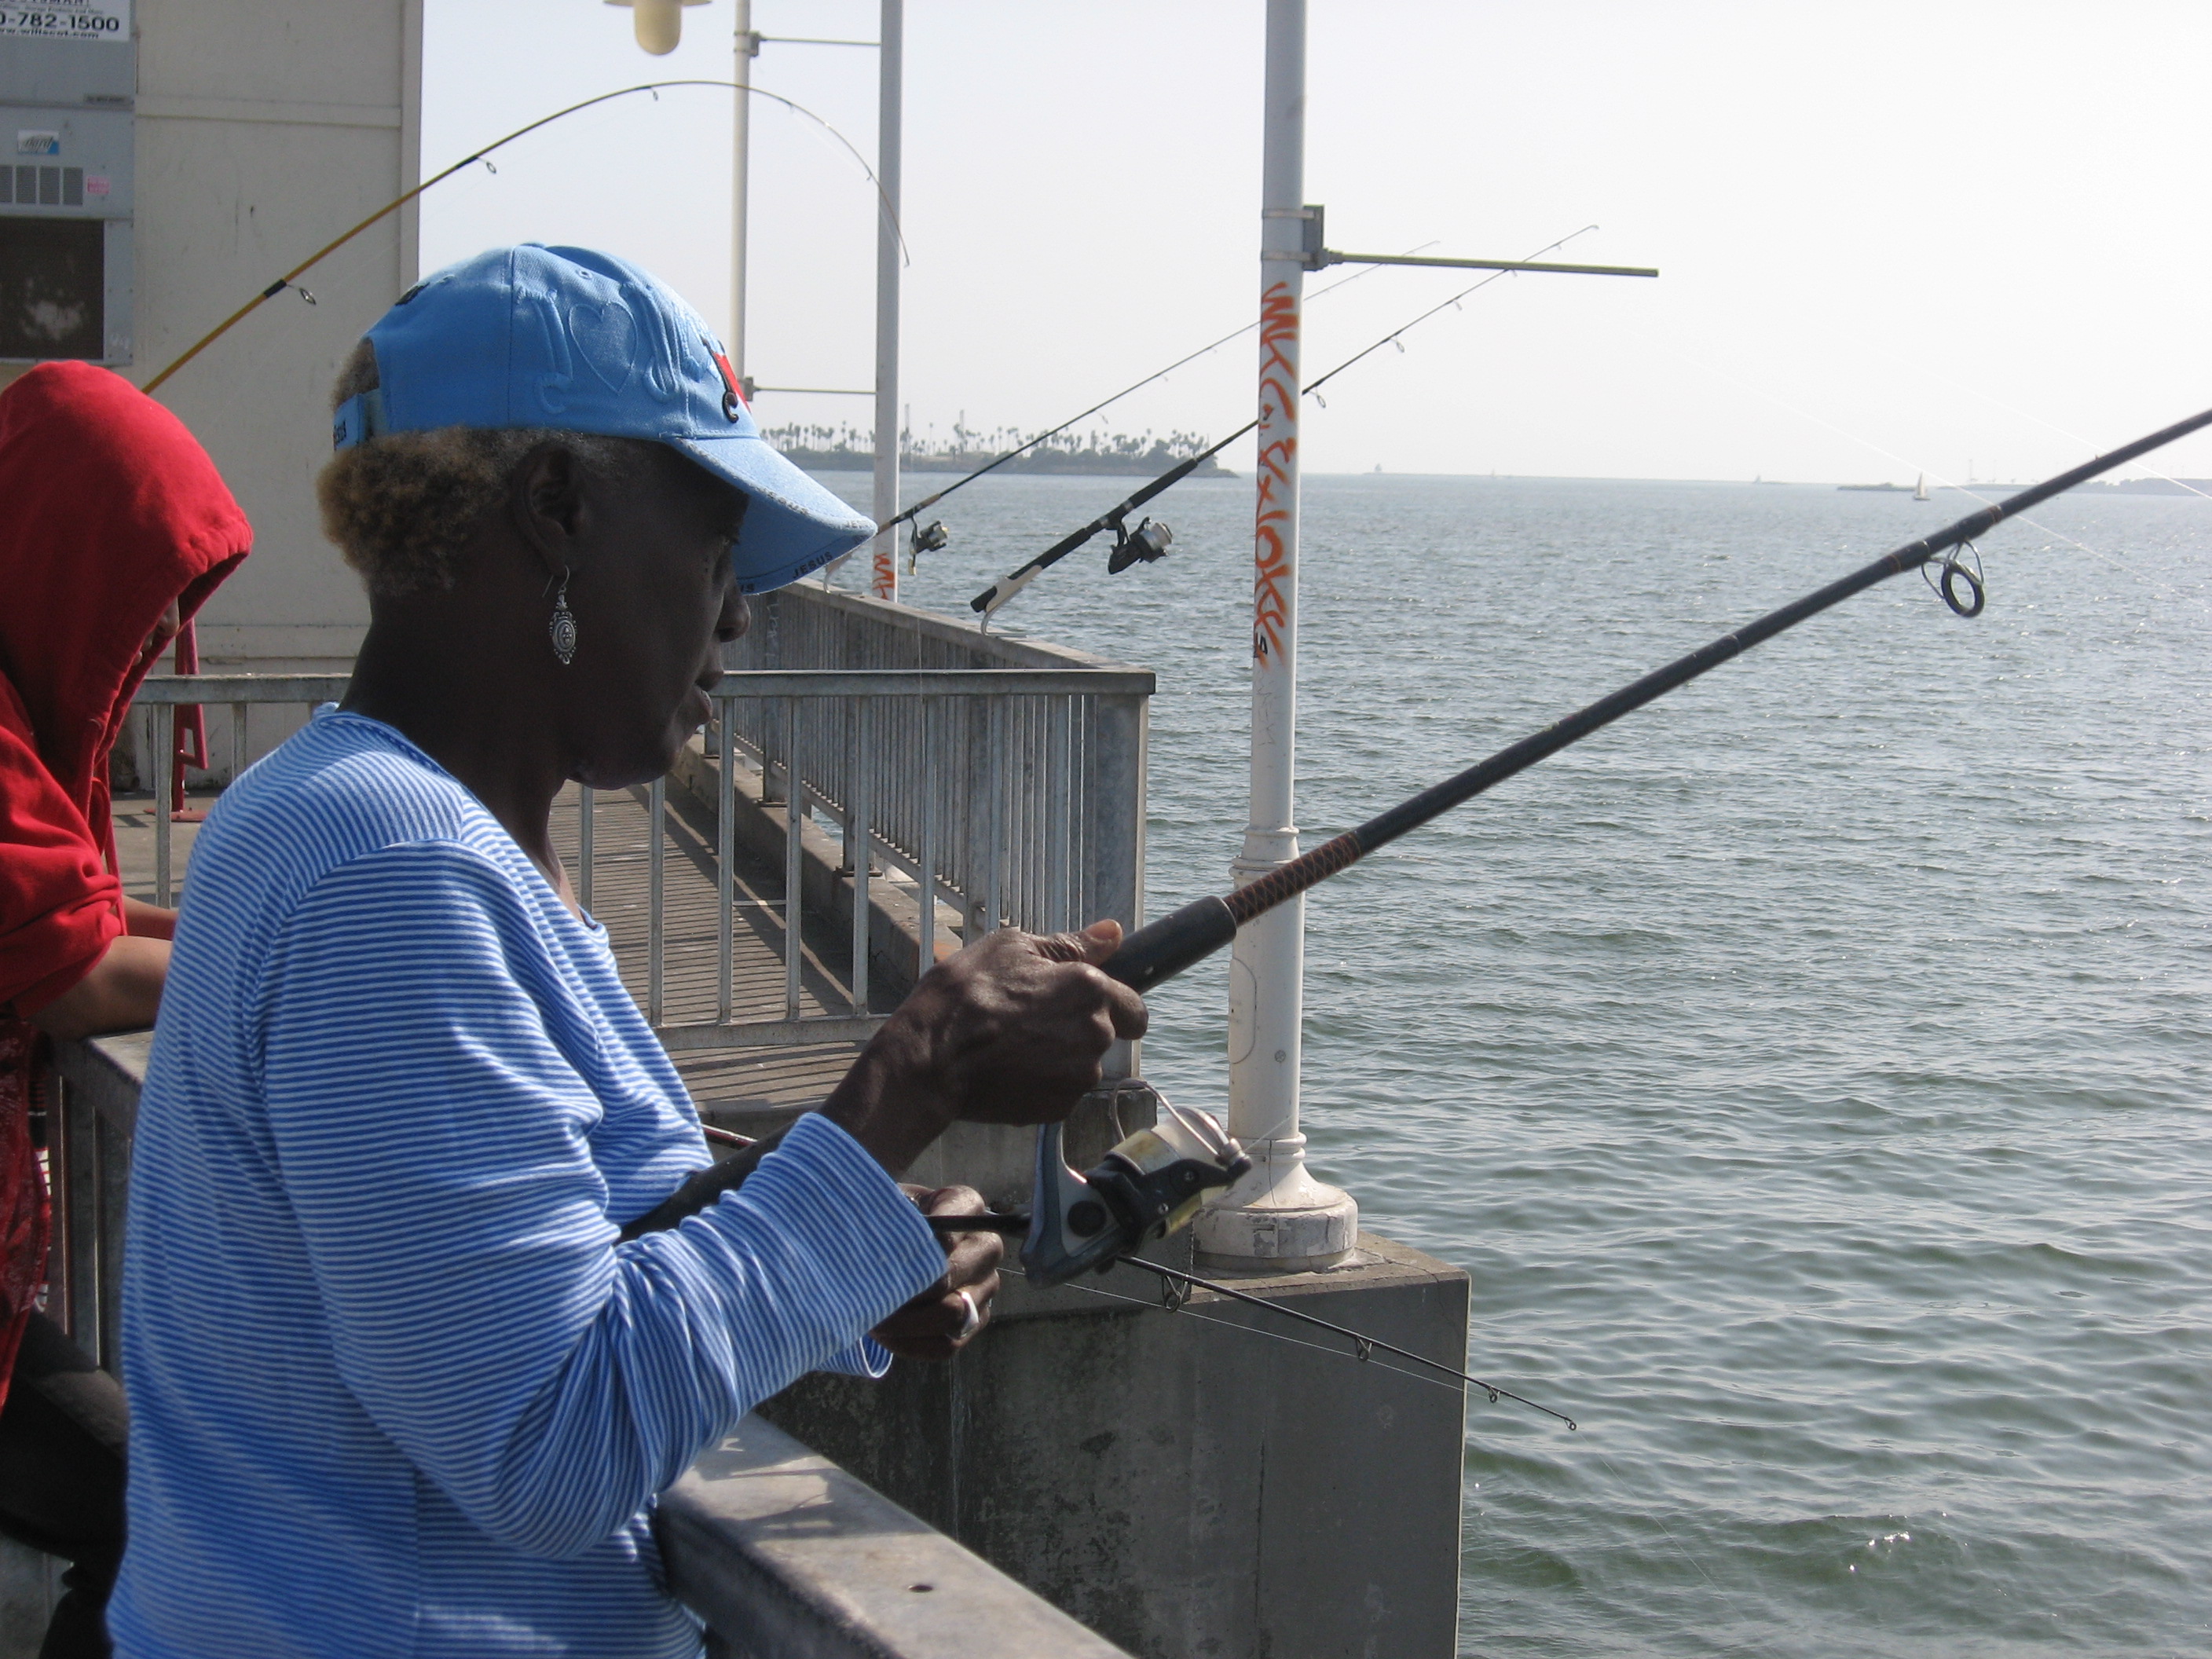 Deborah White of Fontana fishes on a recent Saturday afternoon at the Belmont Veterans Memorial Pier in Long Beach. Outreach programs have helped White and other anglers learn about the dangers of contaminated fish.